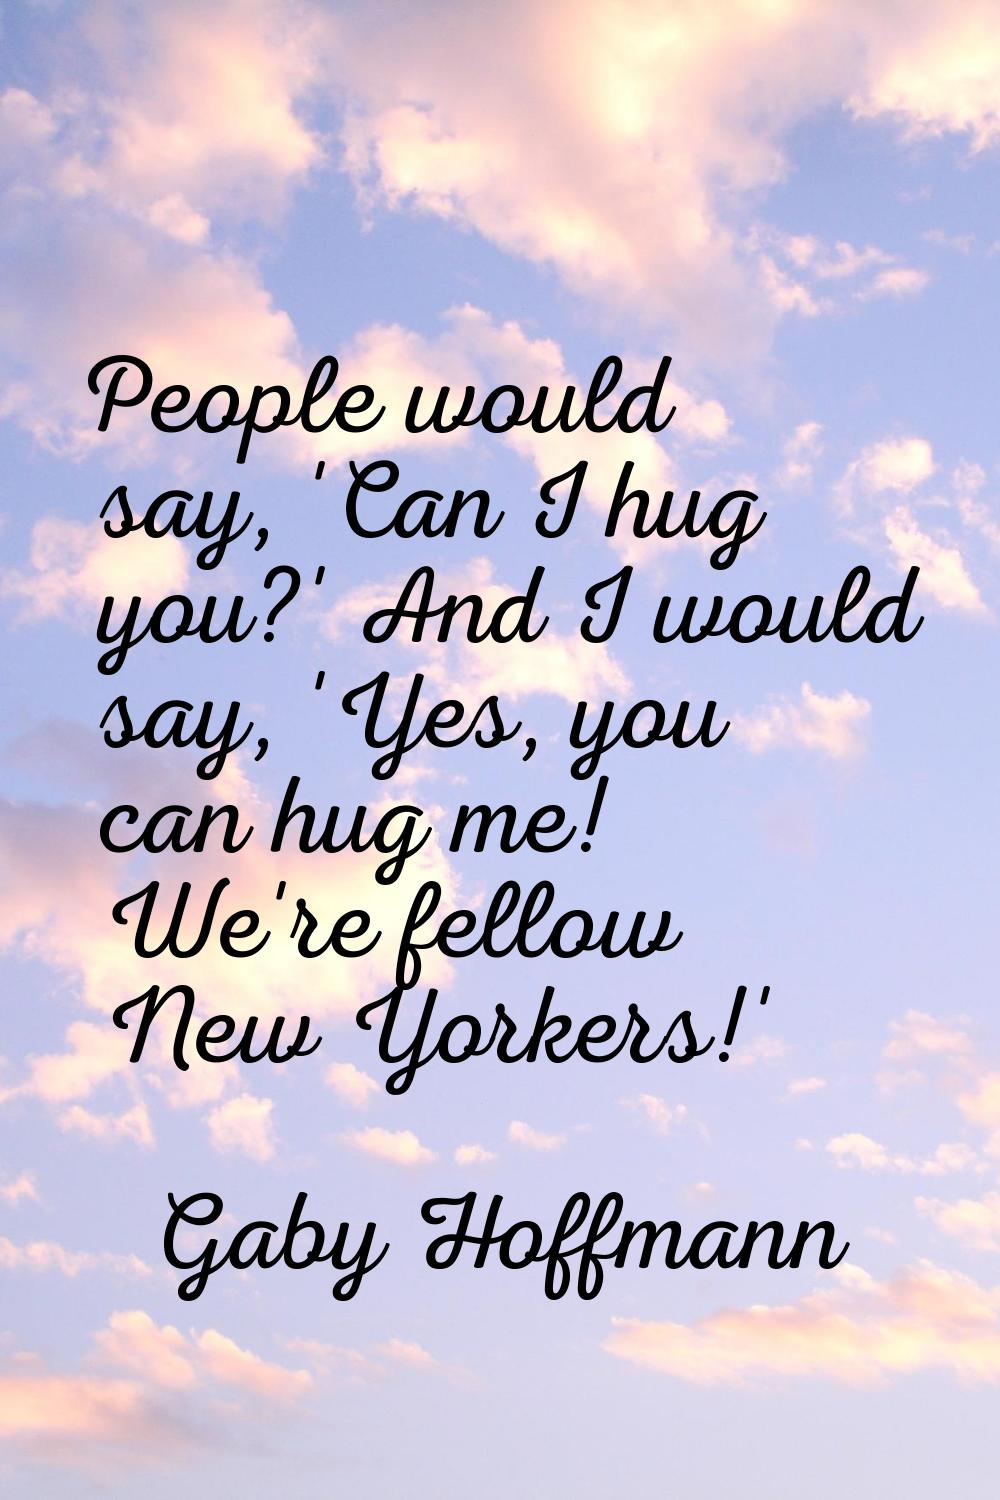 People would say, 'Can I hug you?' And I would say, 'Yes, you can hug me! We're fellow New Yorkers!